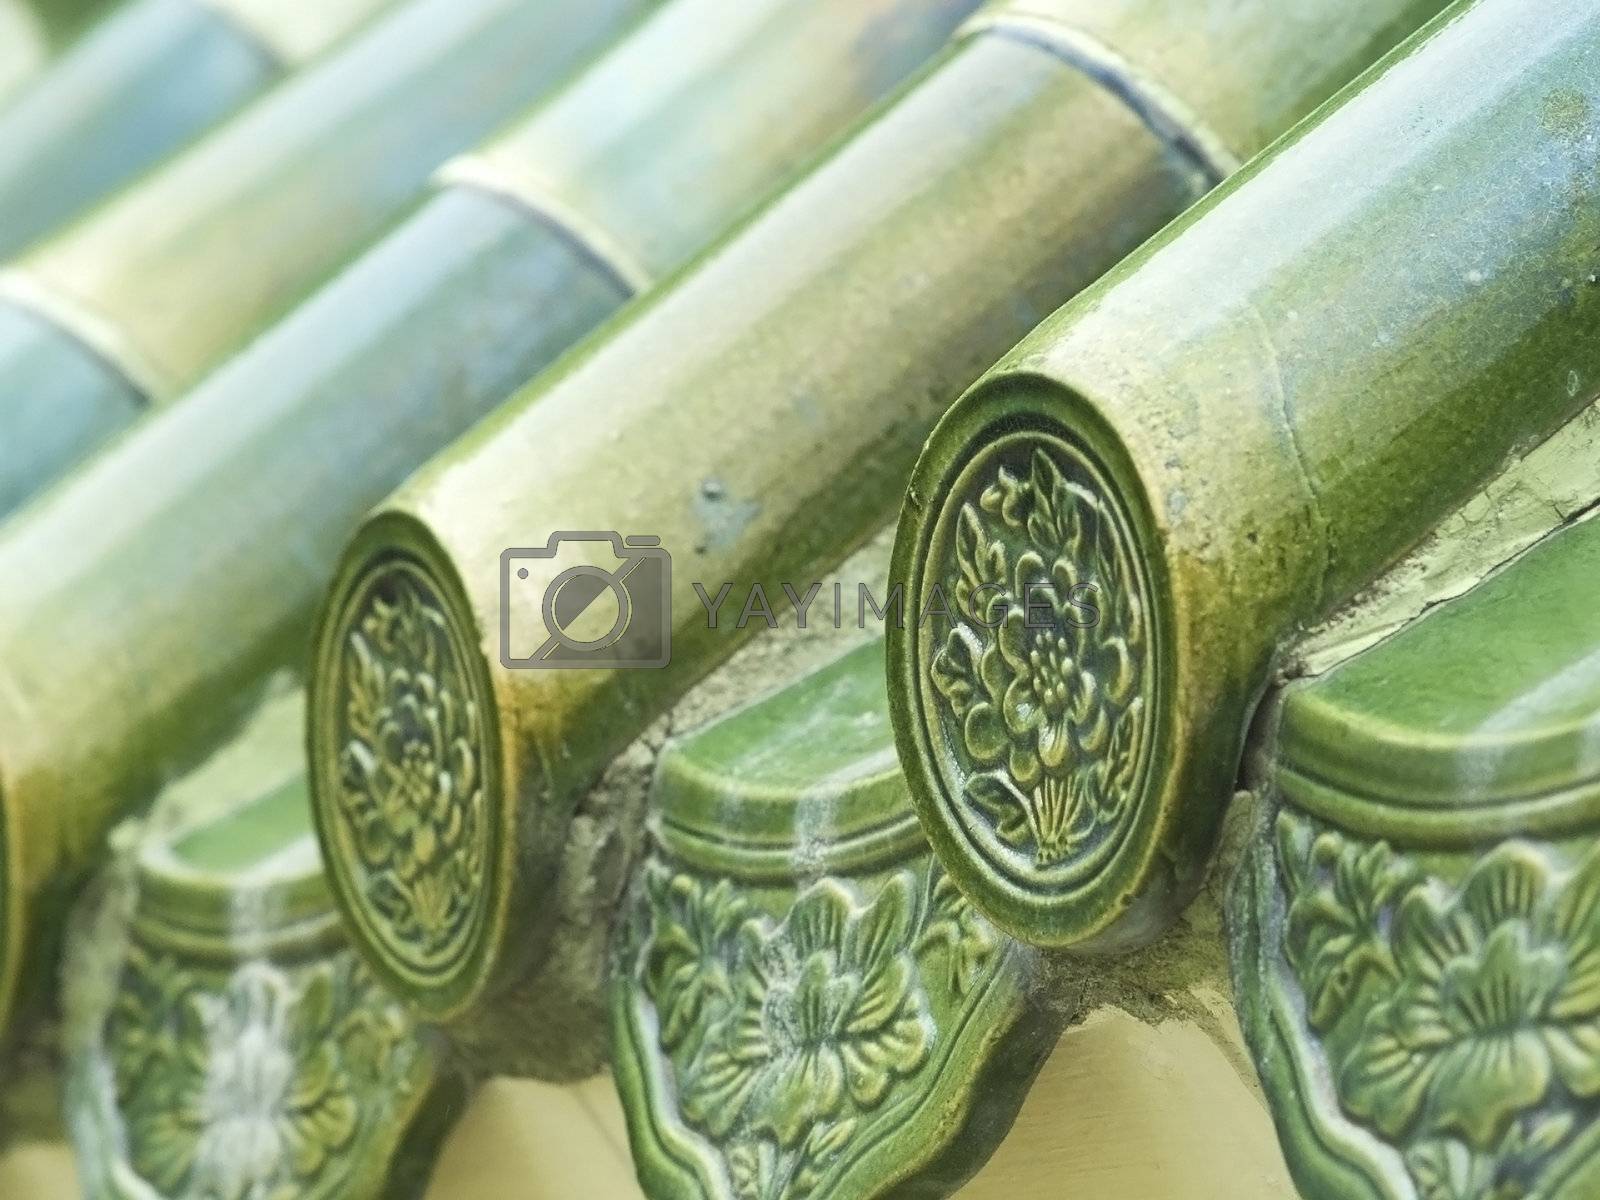 Royalty free image of Chinese roof tiles by epixx